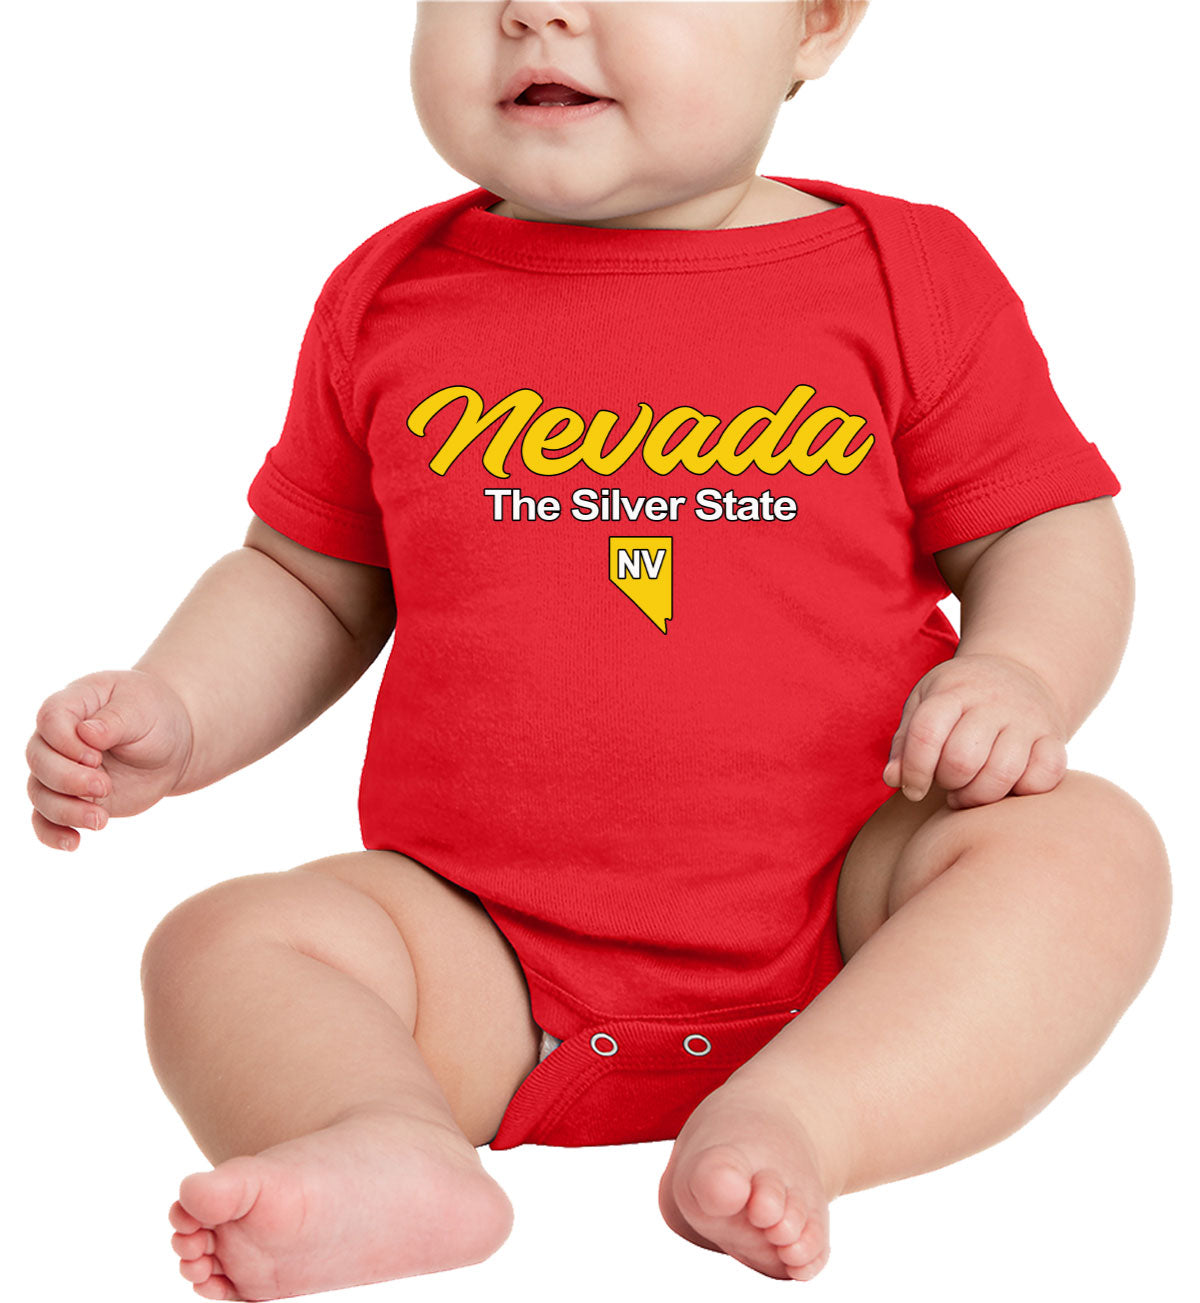 Nevada The Silver State Baby Onesie